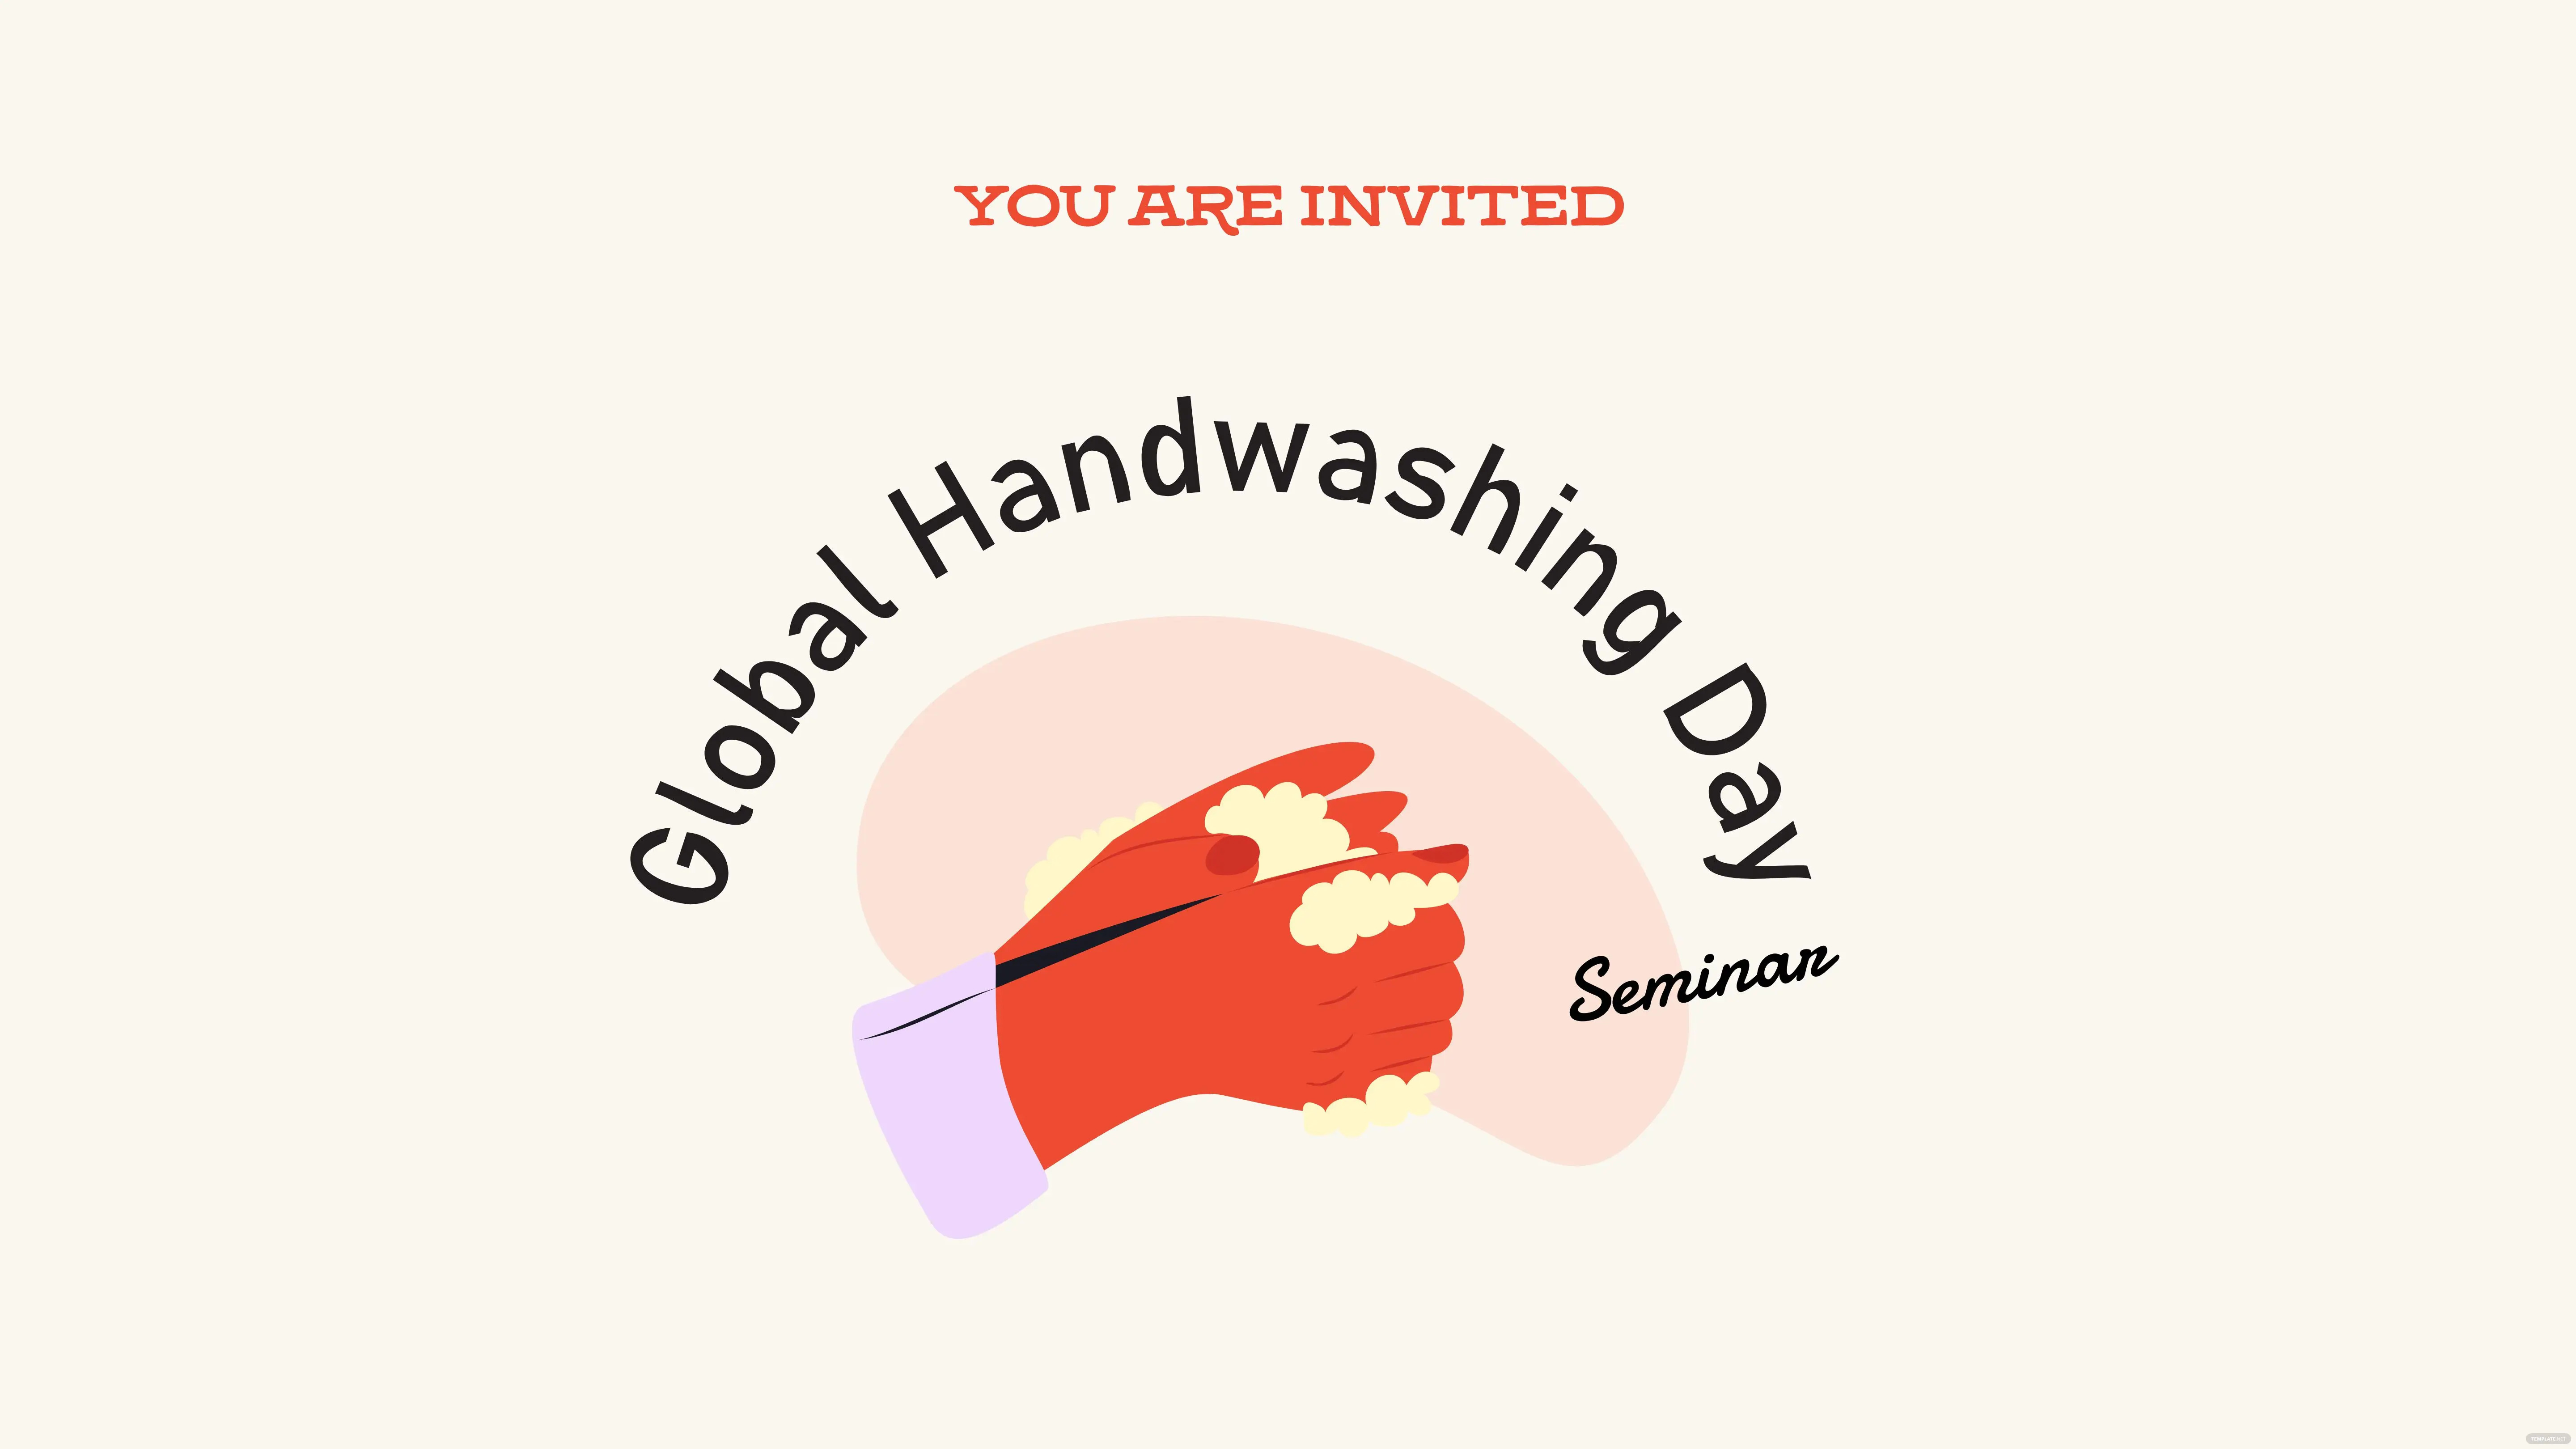 global-handwashing-day-invitation-background-ideas-and-examples